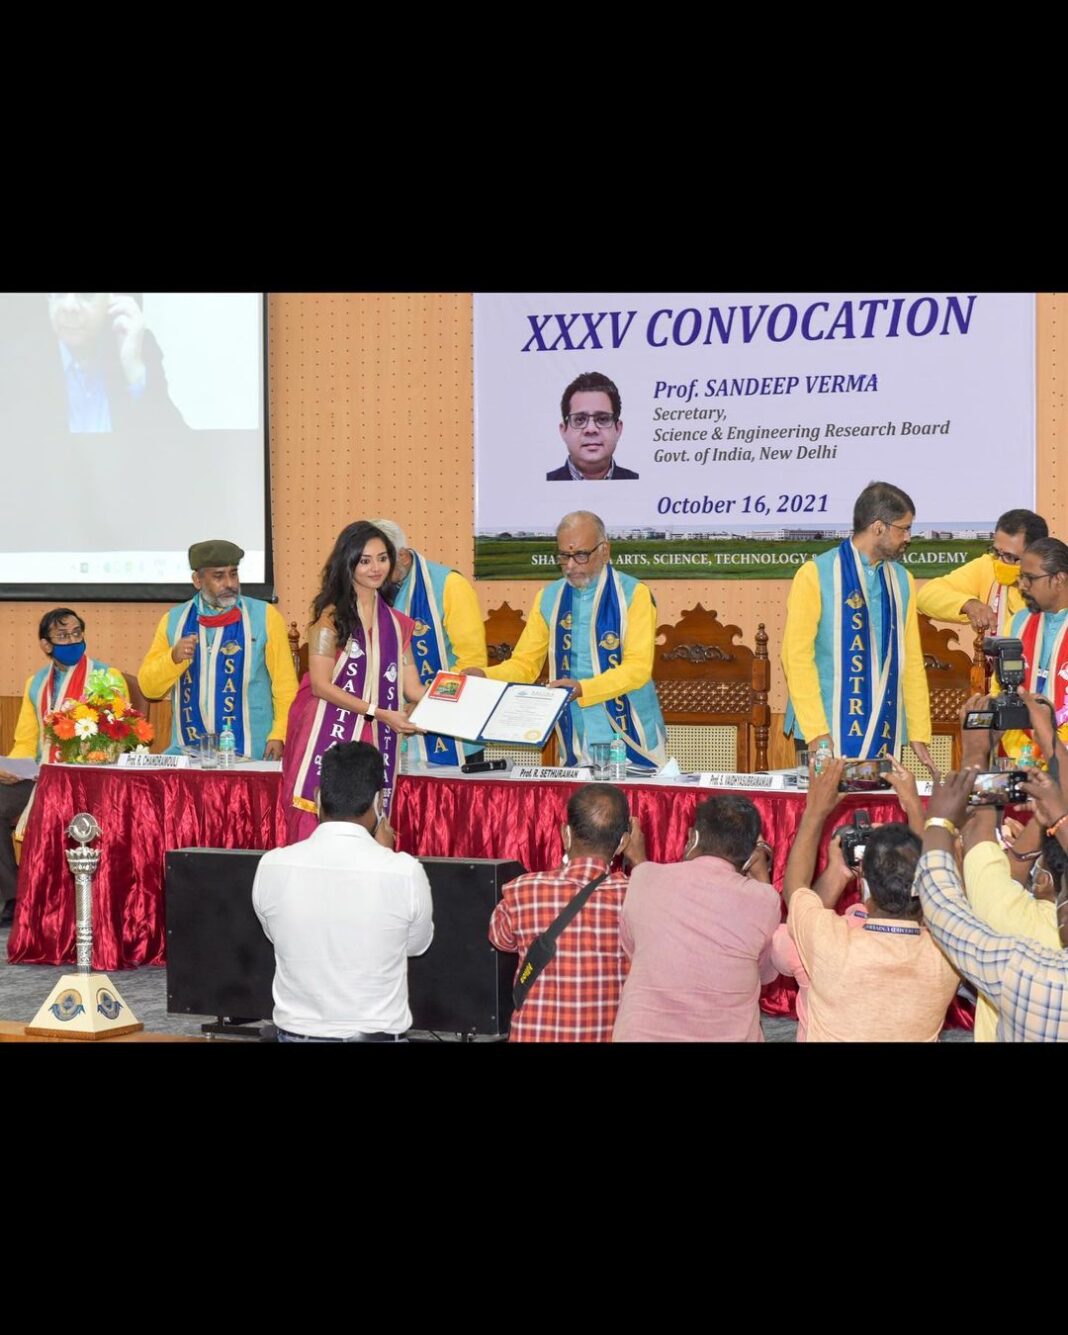 Vidhya Instagram - An emotional convocation ceremony and celebration: Holding a Doctorate degree in Stem cell biology (specialized in Ocular Stem cells) - An emotional journey of years of hard work, patience, perseverance and determination. I thank my Gurus, my Guide, Co-guide, Scientists, Clinicians and all who have guided and supported me throughout the journey in making my dream come true. I thank Sankara Nethralaya Eye hospital, Sastra University and all my dear friends and colleagues. Being an actor and a scientist simultaneously was extremely challenging, but at the end of the day, having a doctorate degree is worth all the pain, hard work, sacrifices and sleepless nights. While sharing these pics, i would like to inform my friends and well wishers that i have been offered a post-doc Scientist position in the US and will be moving next year. Seeking all your blessings and wishes as always. I'm forever grateful for all your love and support🙏 #vidyapradeep